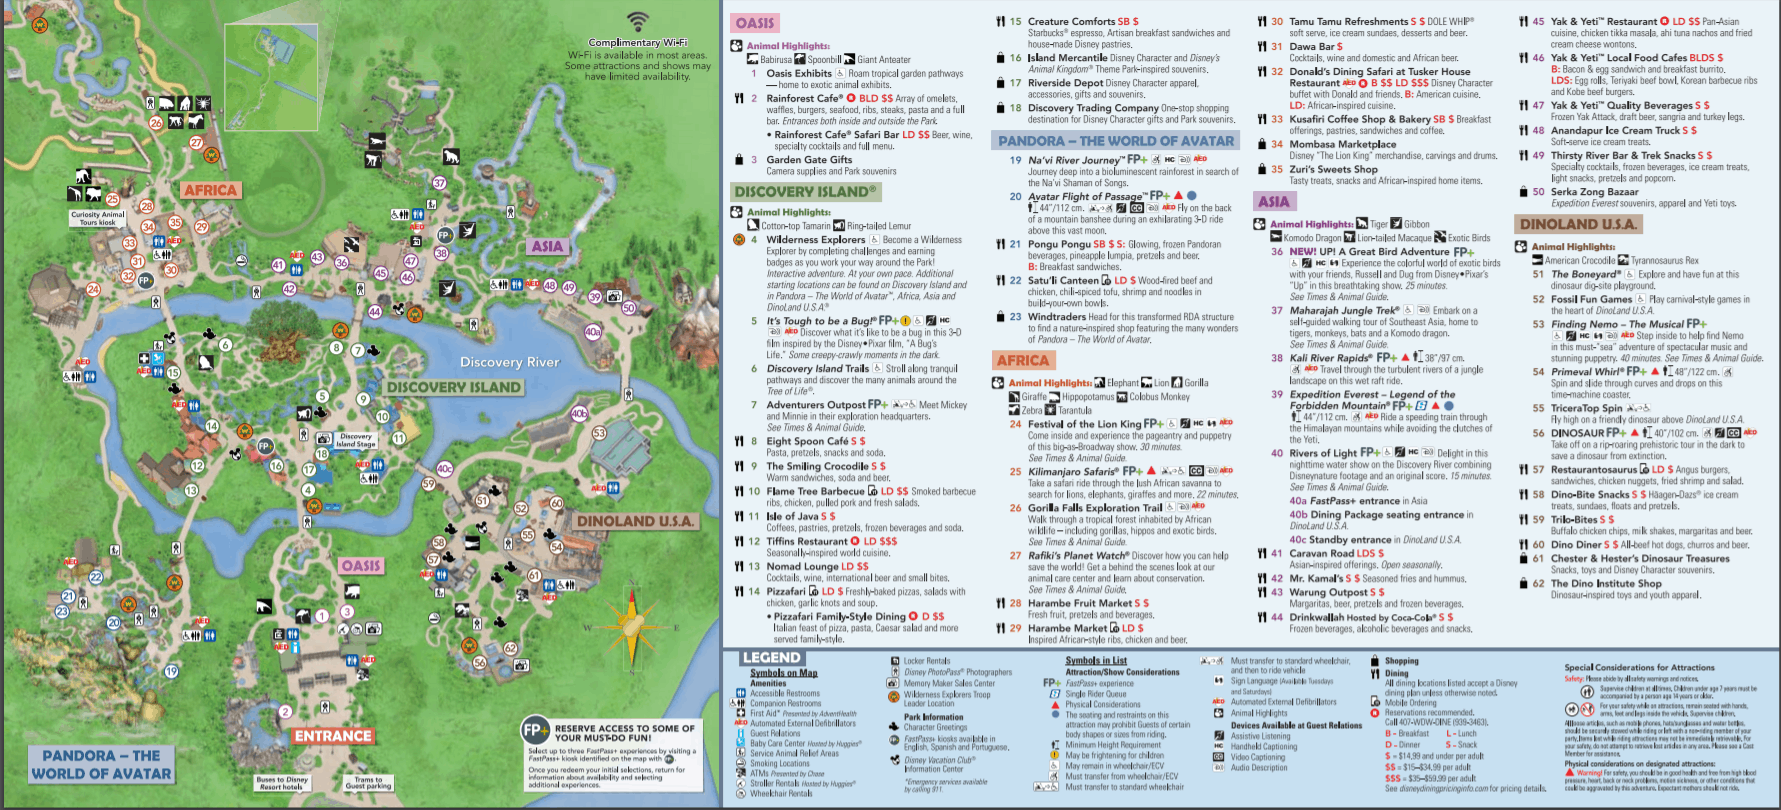 complete-guide-to-animal-kingdom-at-disney-world-wdw-prep-school